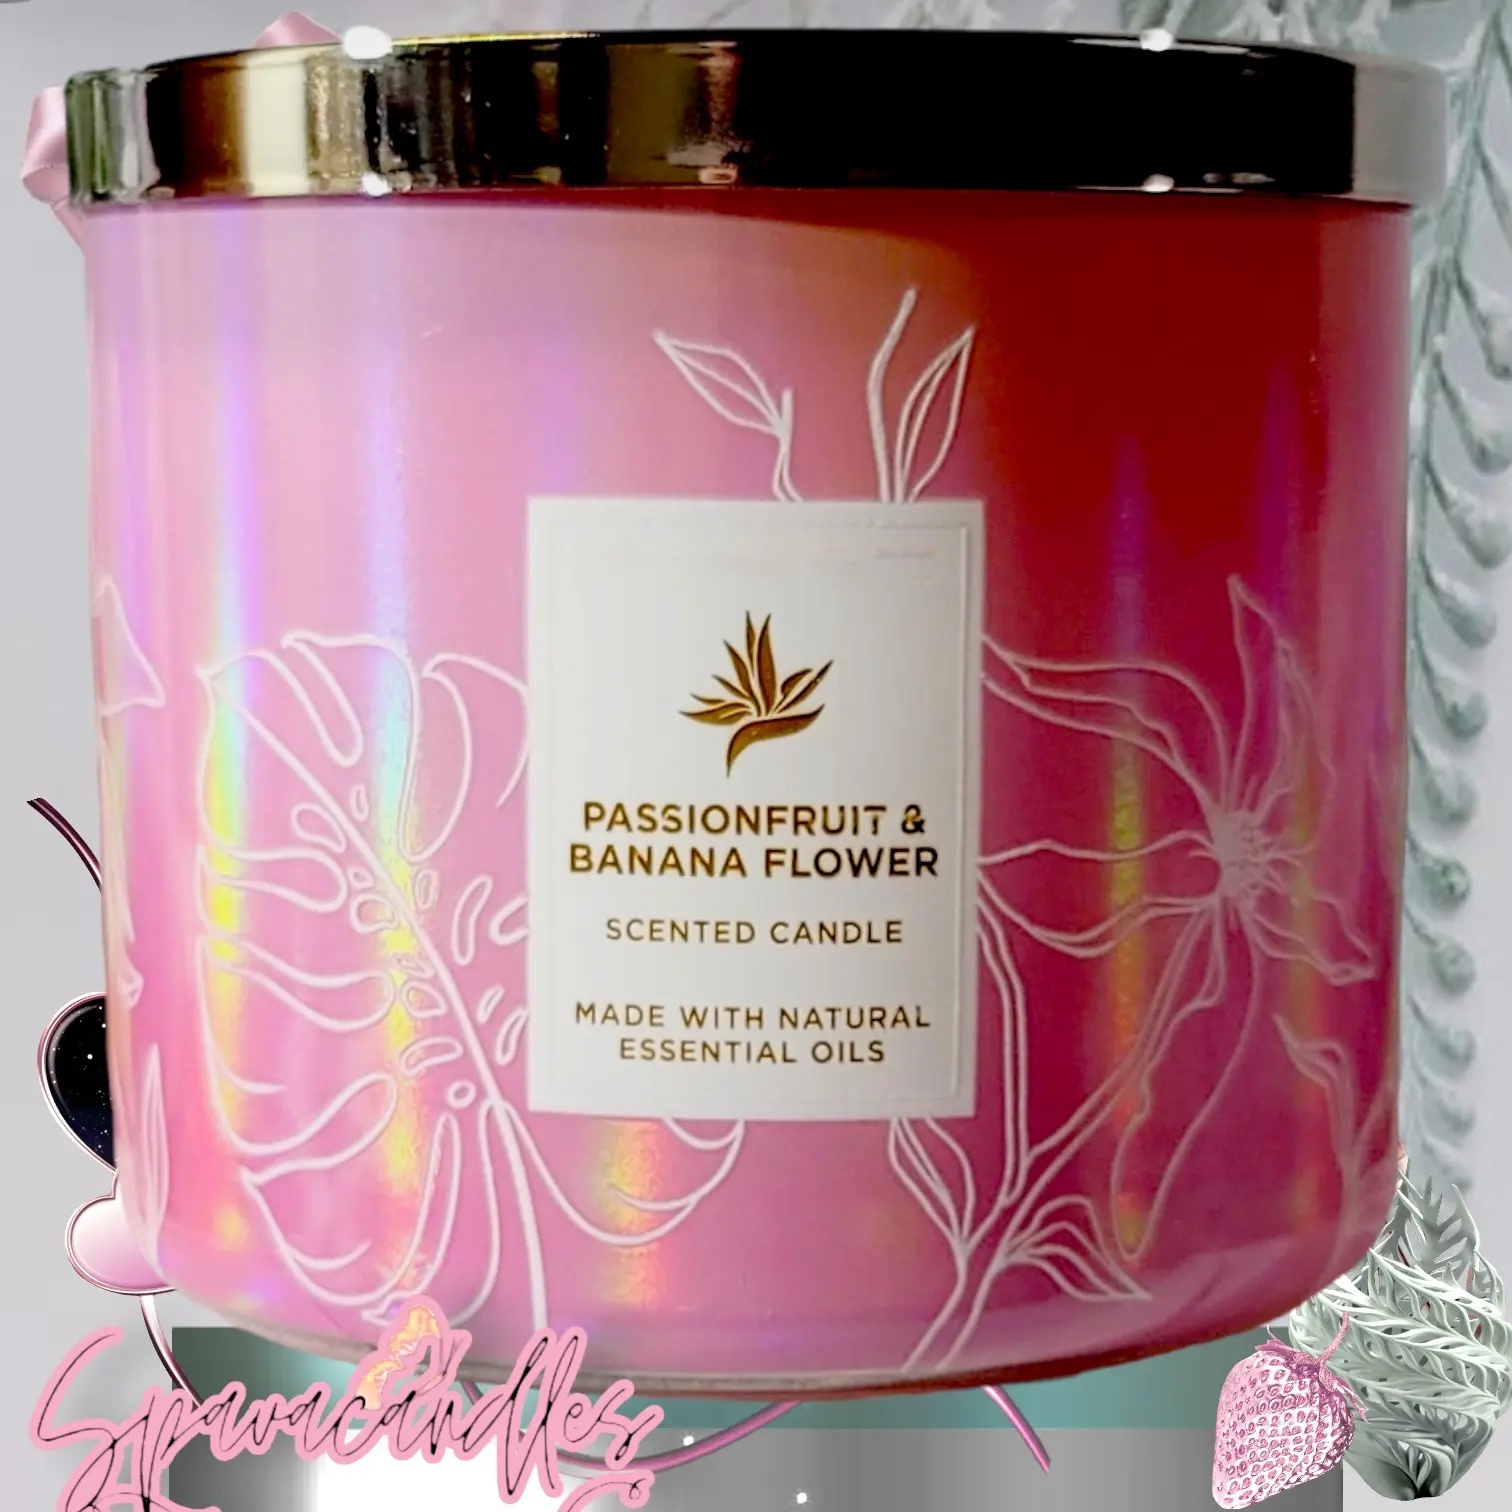 Passion fruit & banana flower 3 Wick Candle 14.5 oz. New 2022